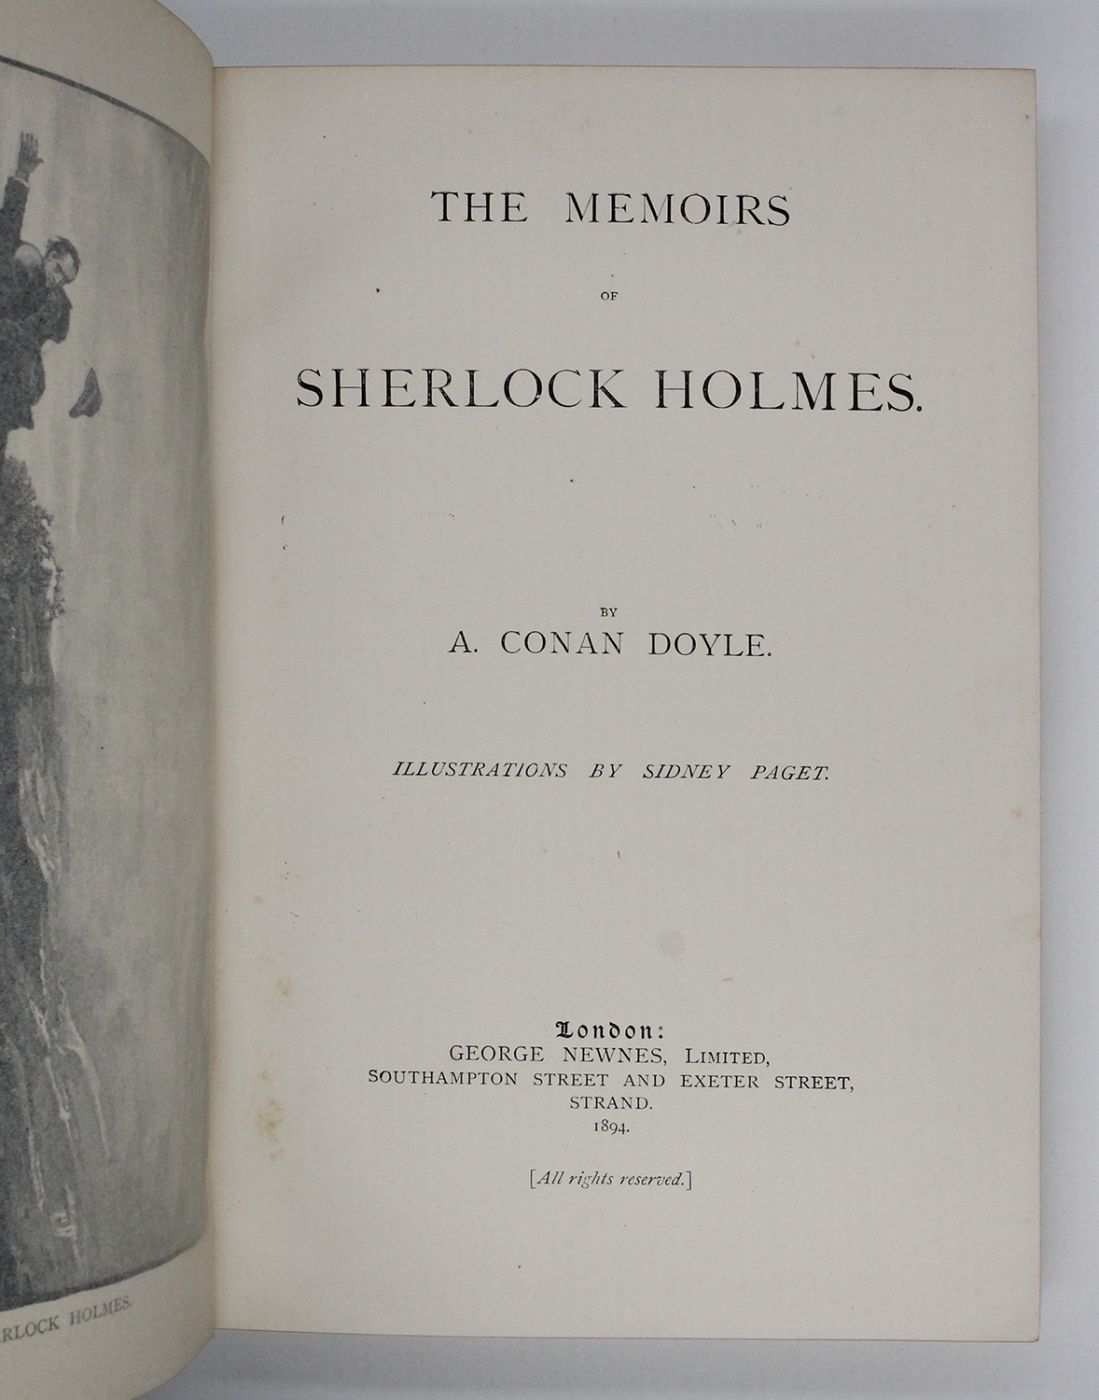 THE ADVENTURES OF SHERLOCK HOLMES with THE MEMOIRS OF SHERLOCK HOLMES. -  image 7